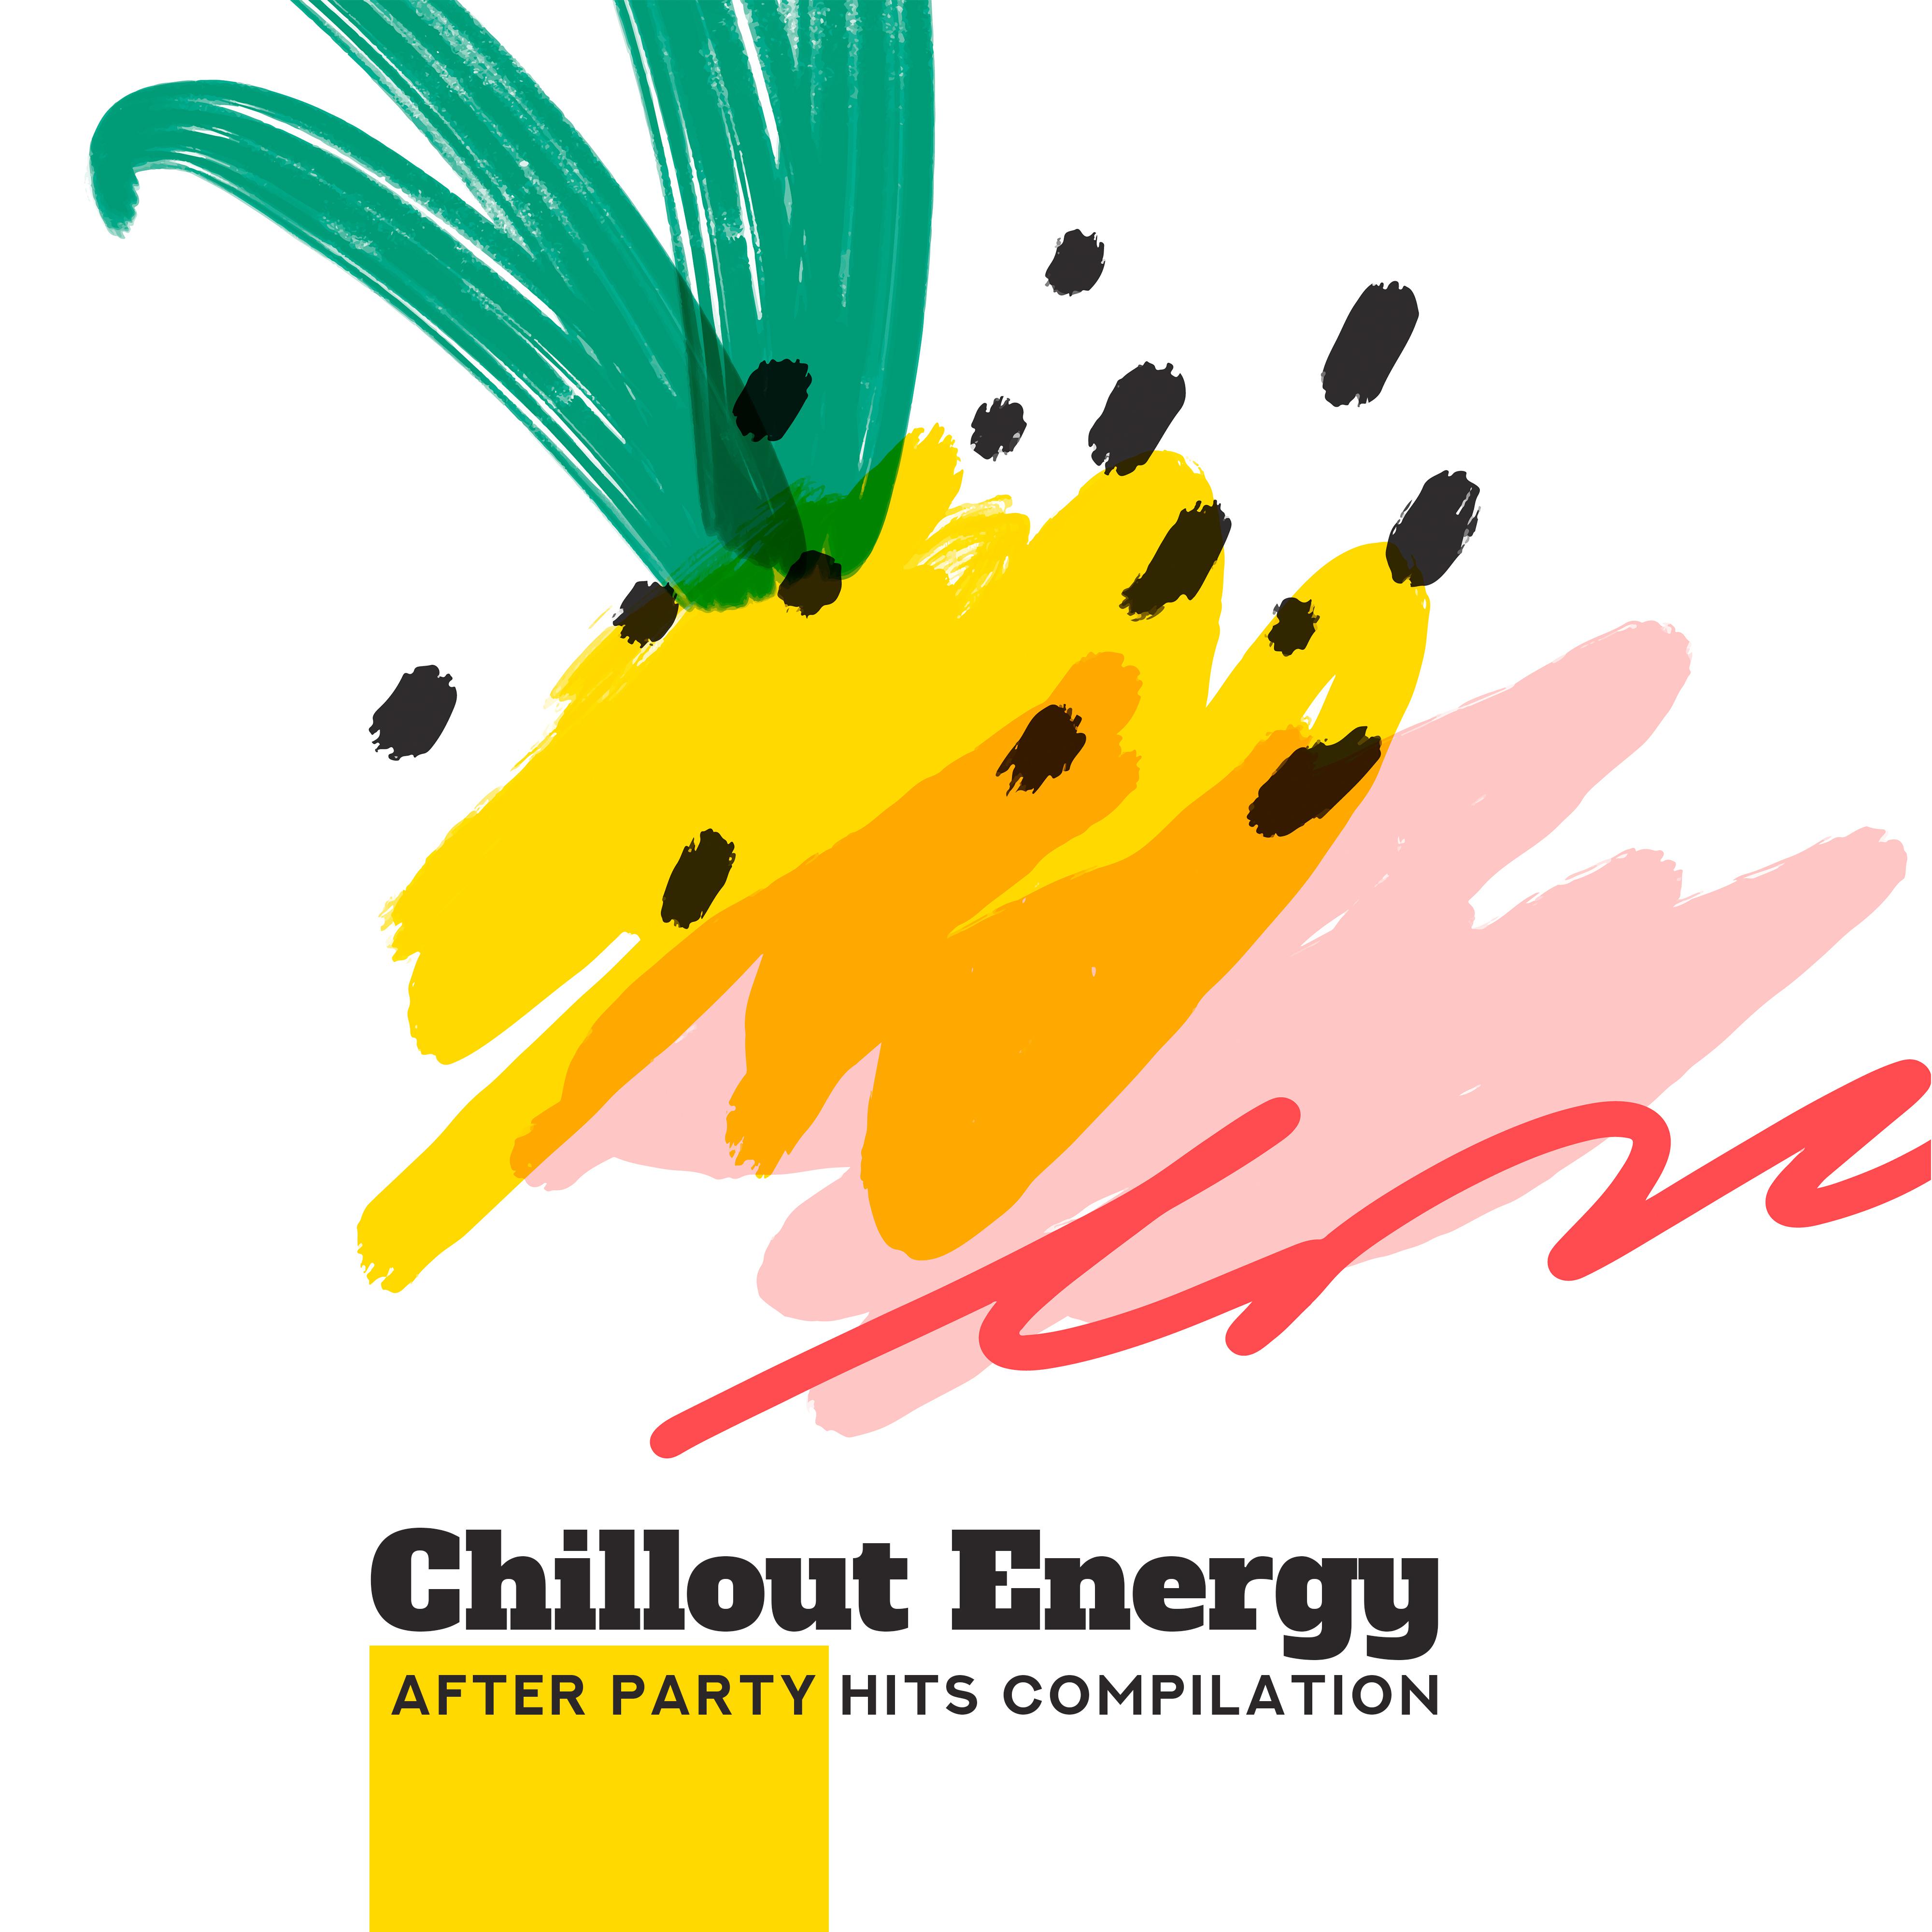 Chillout Energy After Party Hits Compilation: 15 Electronic Hot Low BPM Songs for After Party, Club Melodies, Deep Relax